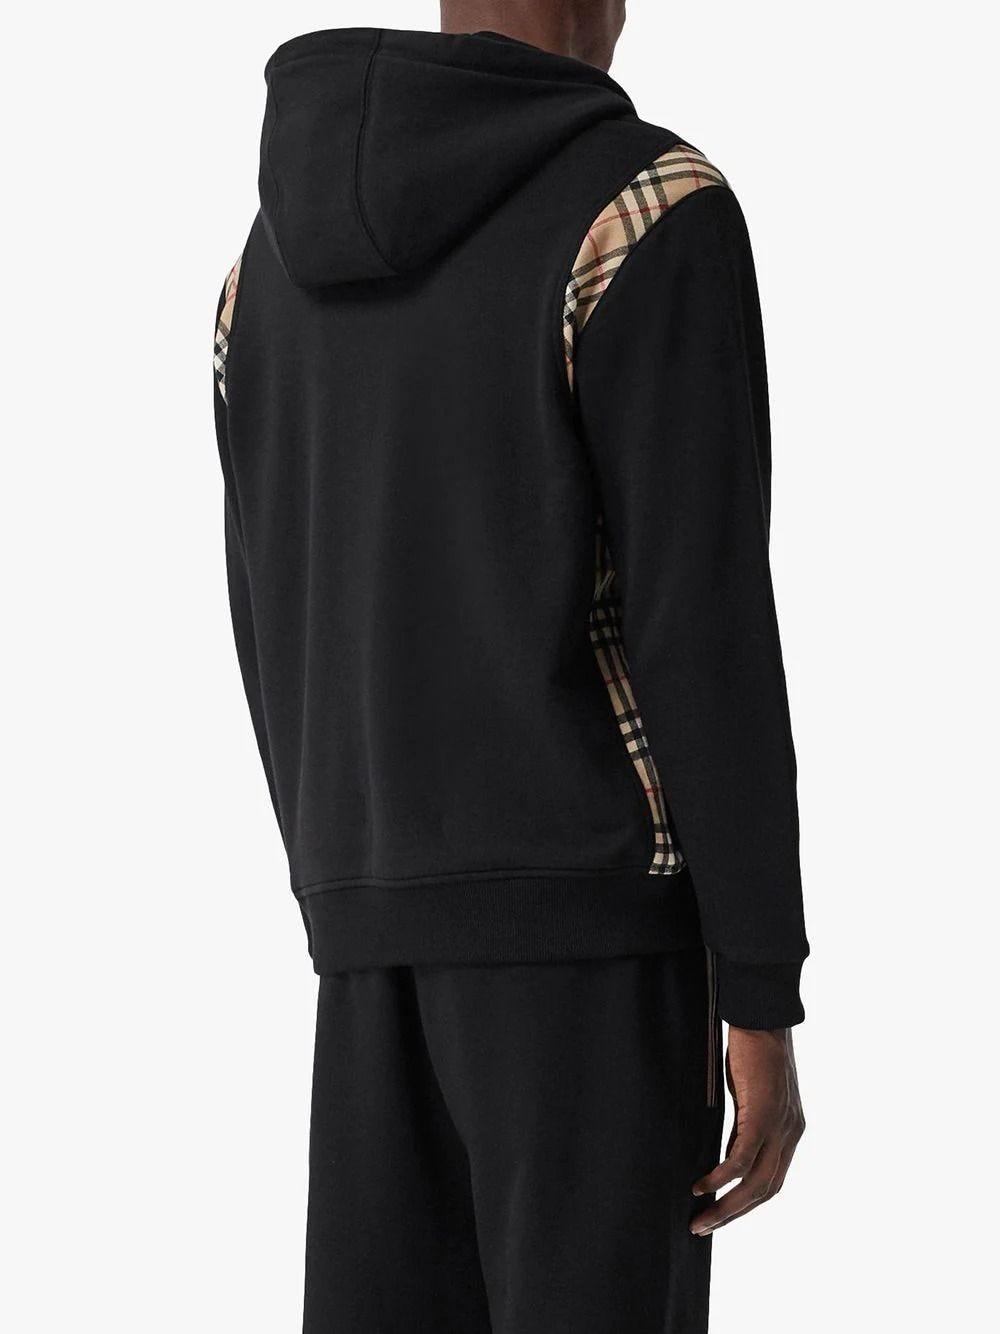 Burberry Vintage Check Panel Cotton Hoodie in Nero (Black) for Men - Save  51% - Lyst